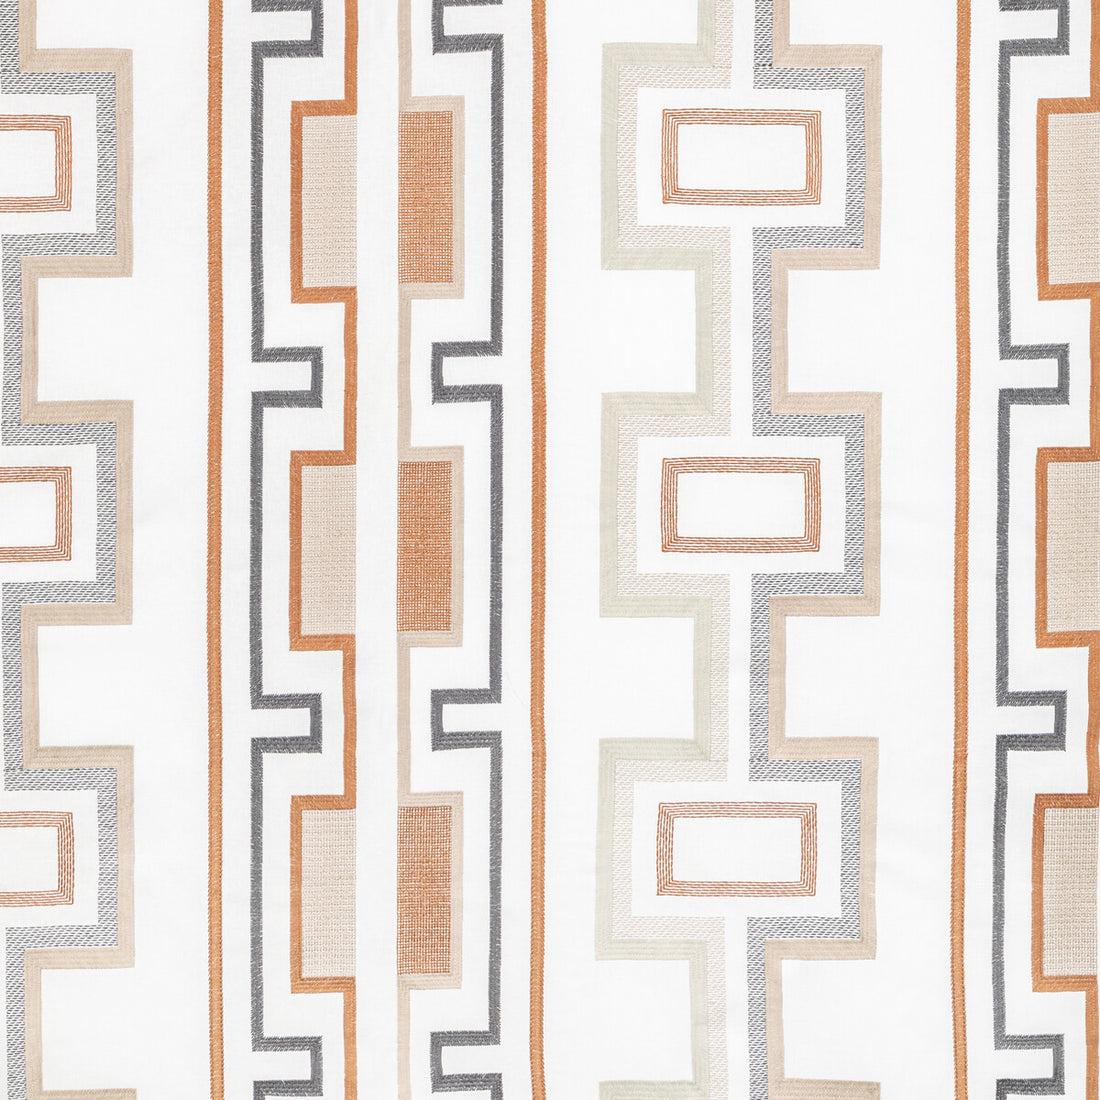 Tritone Embroidery fabric in copper color - pattern GWF-3779.1624.0 - by Lee Jofa Modern in the Rhapsody collection